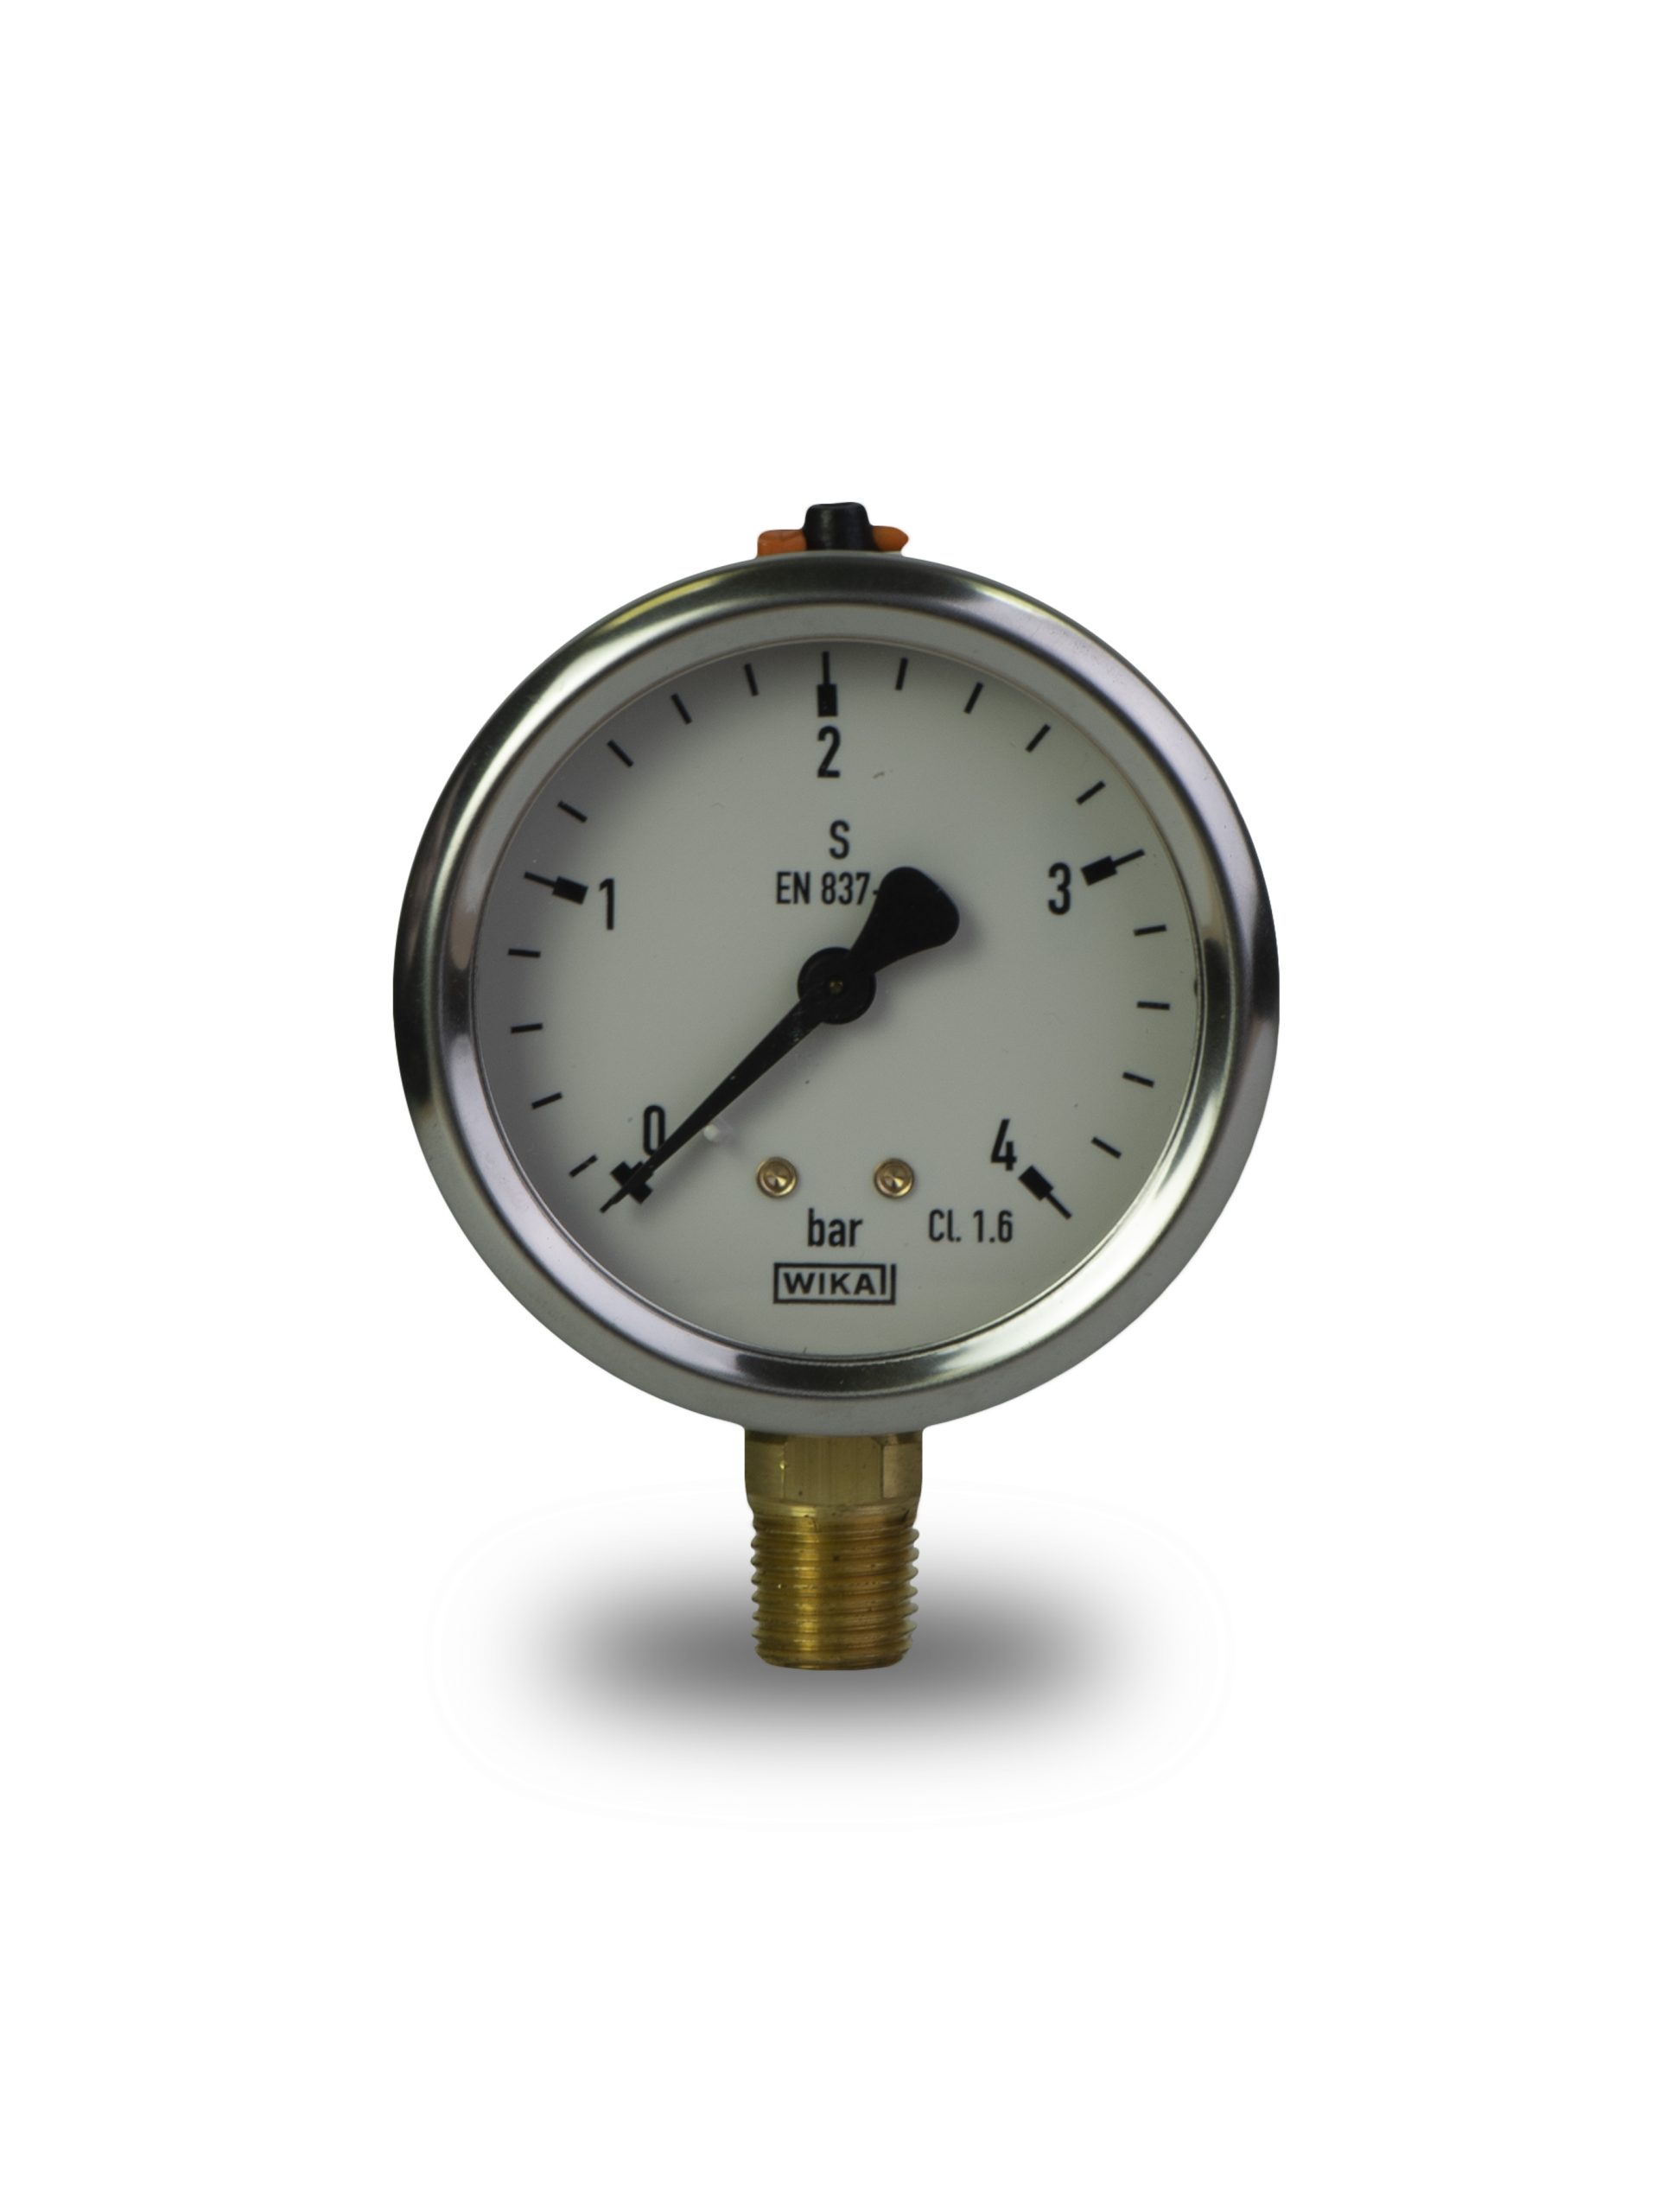 PRESSURE GAUGE  0-4 BAR, DIAMETER 2 1/2 Inches, CONNECTION 1/4 Inches , WIKA from Gas Equipment Company Llc Abu Dhabi, UNITED ARAB EMIRATES